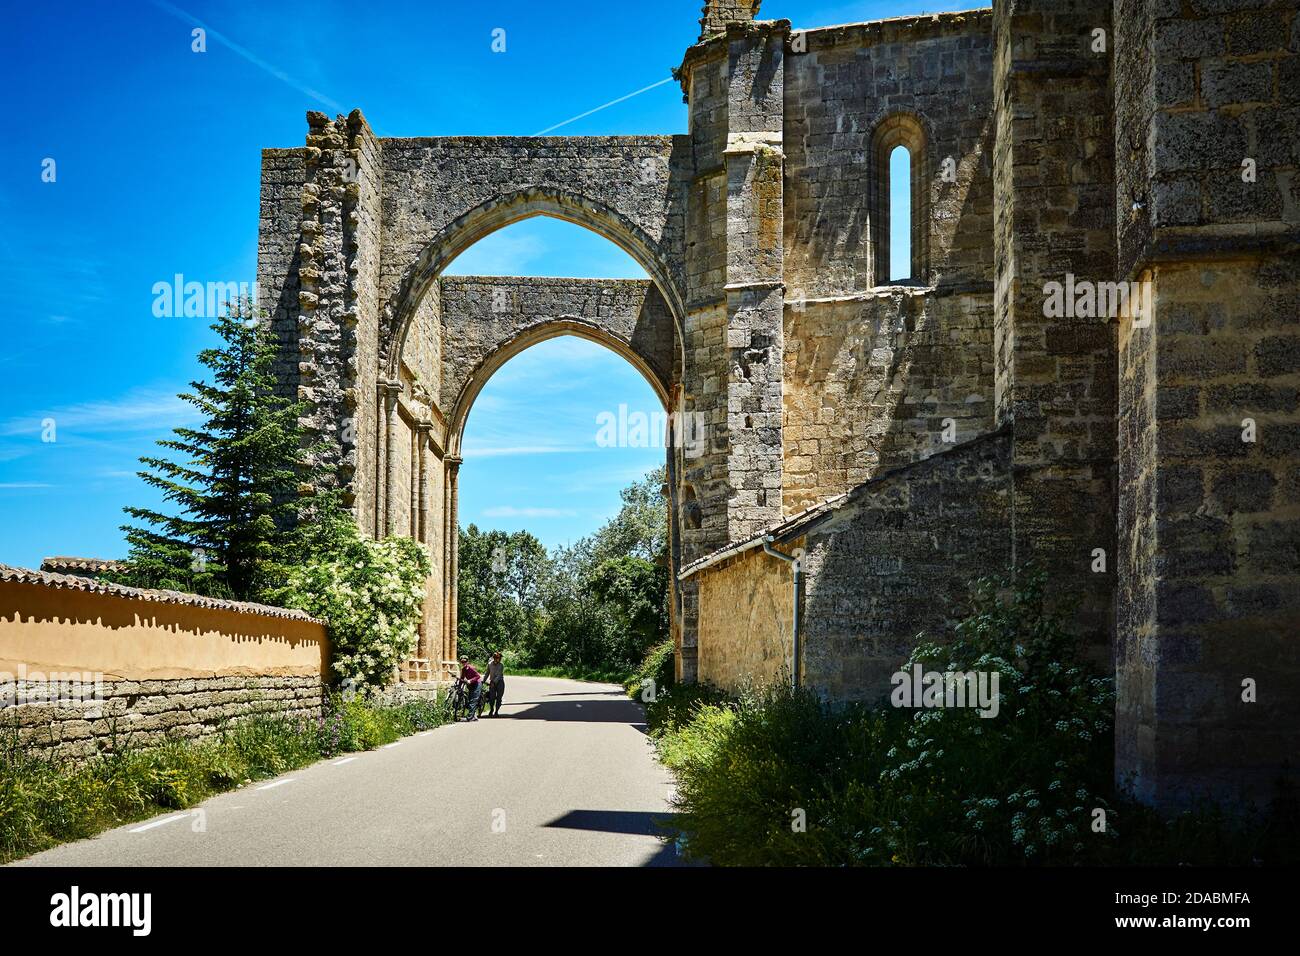 Ruins of the Convent of San Anton. French Way, Way of St. James. Castrojeriz,Burgos, Castile and Leon, Spain, Europe Stock Photo